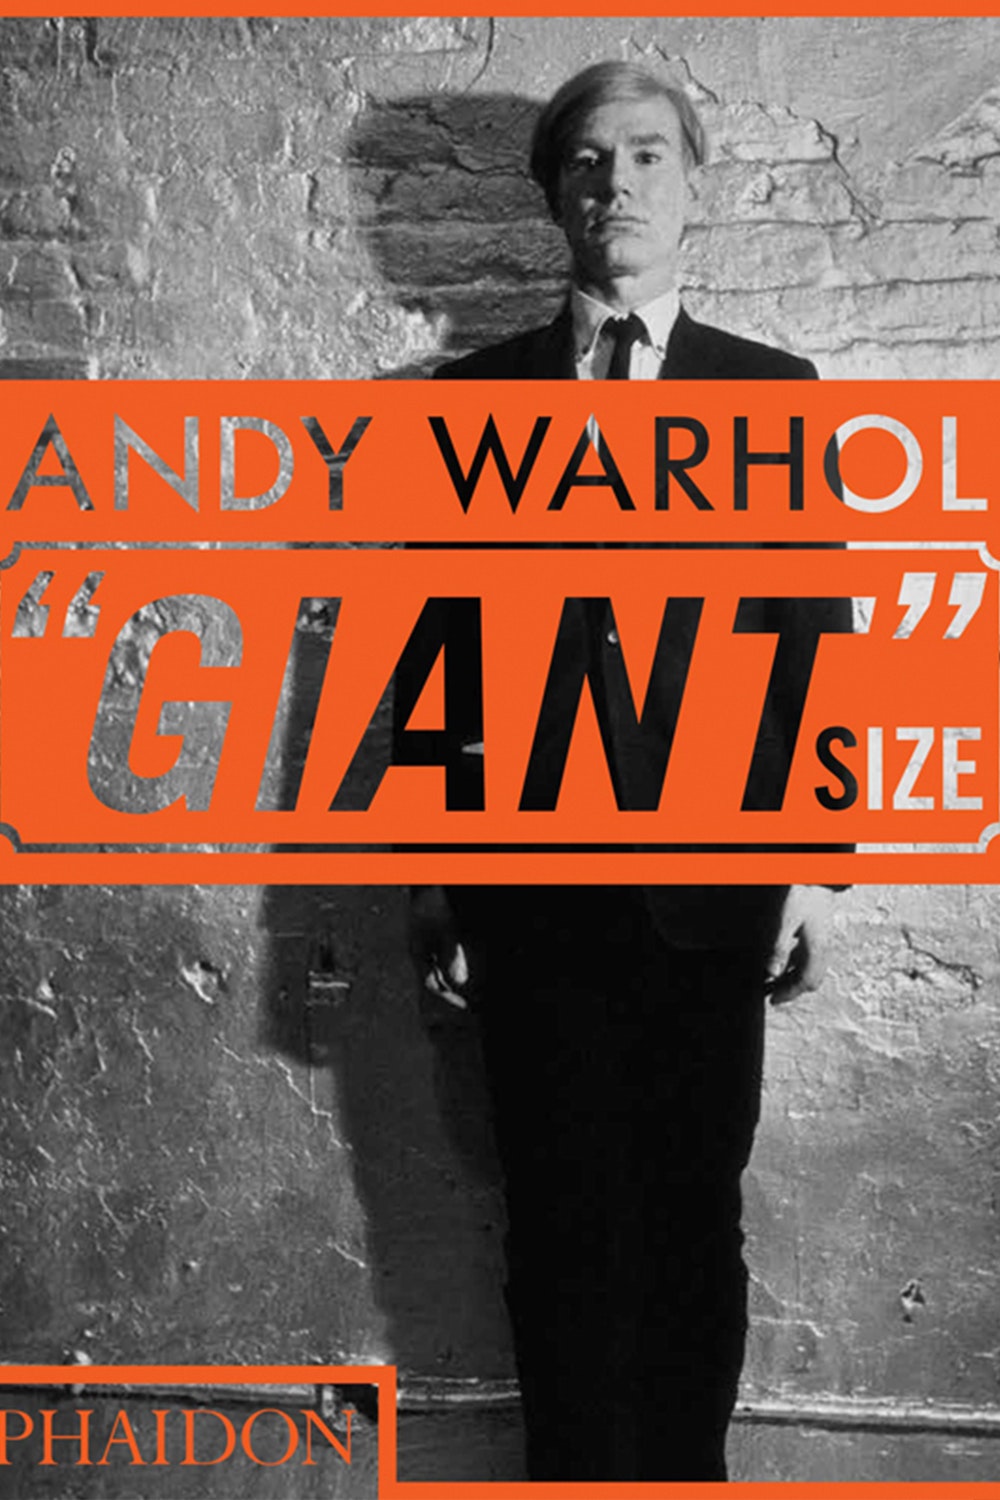 Andy Warhol Giant Size by Phaidon Editors, $75 from Karen Walker